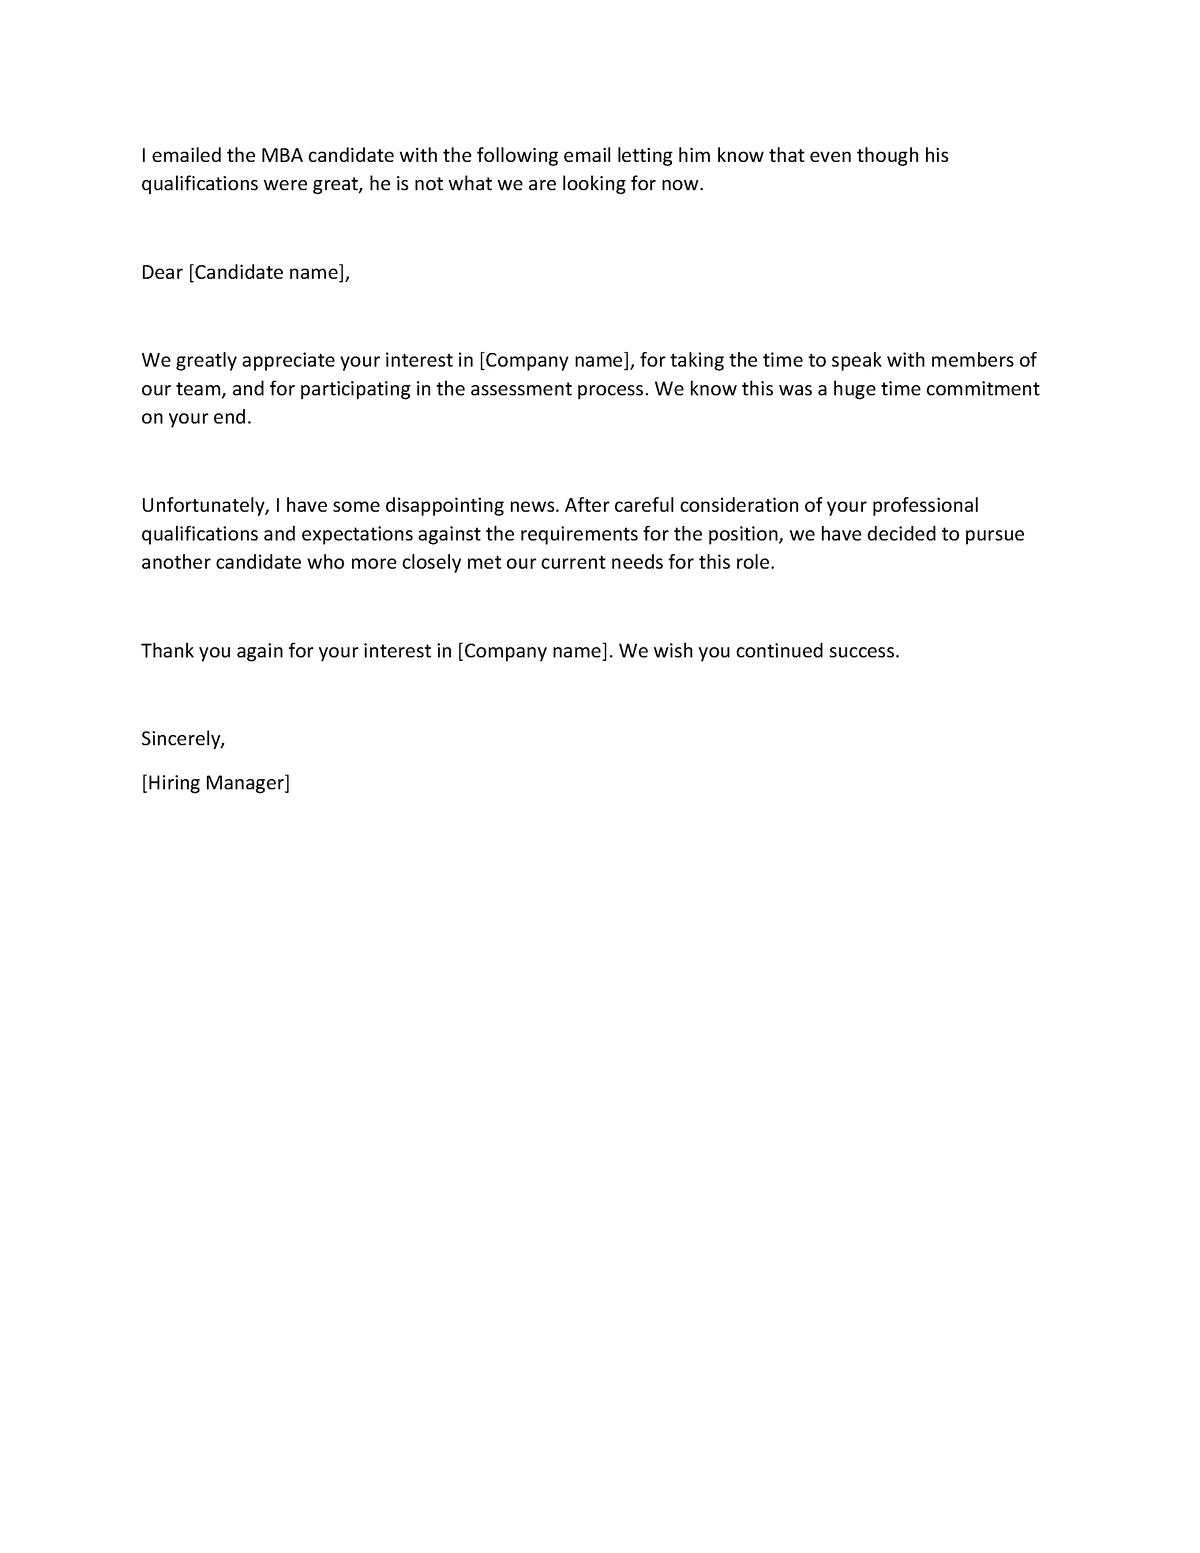 Rejection Letter Sample - I emailed the MBA candidate with the ...